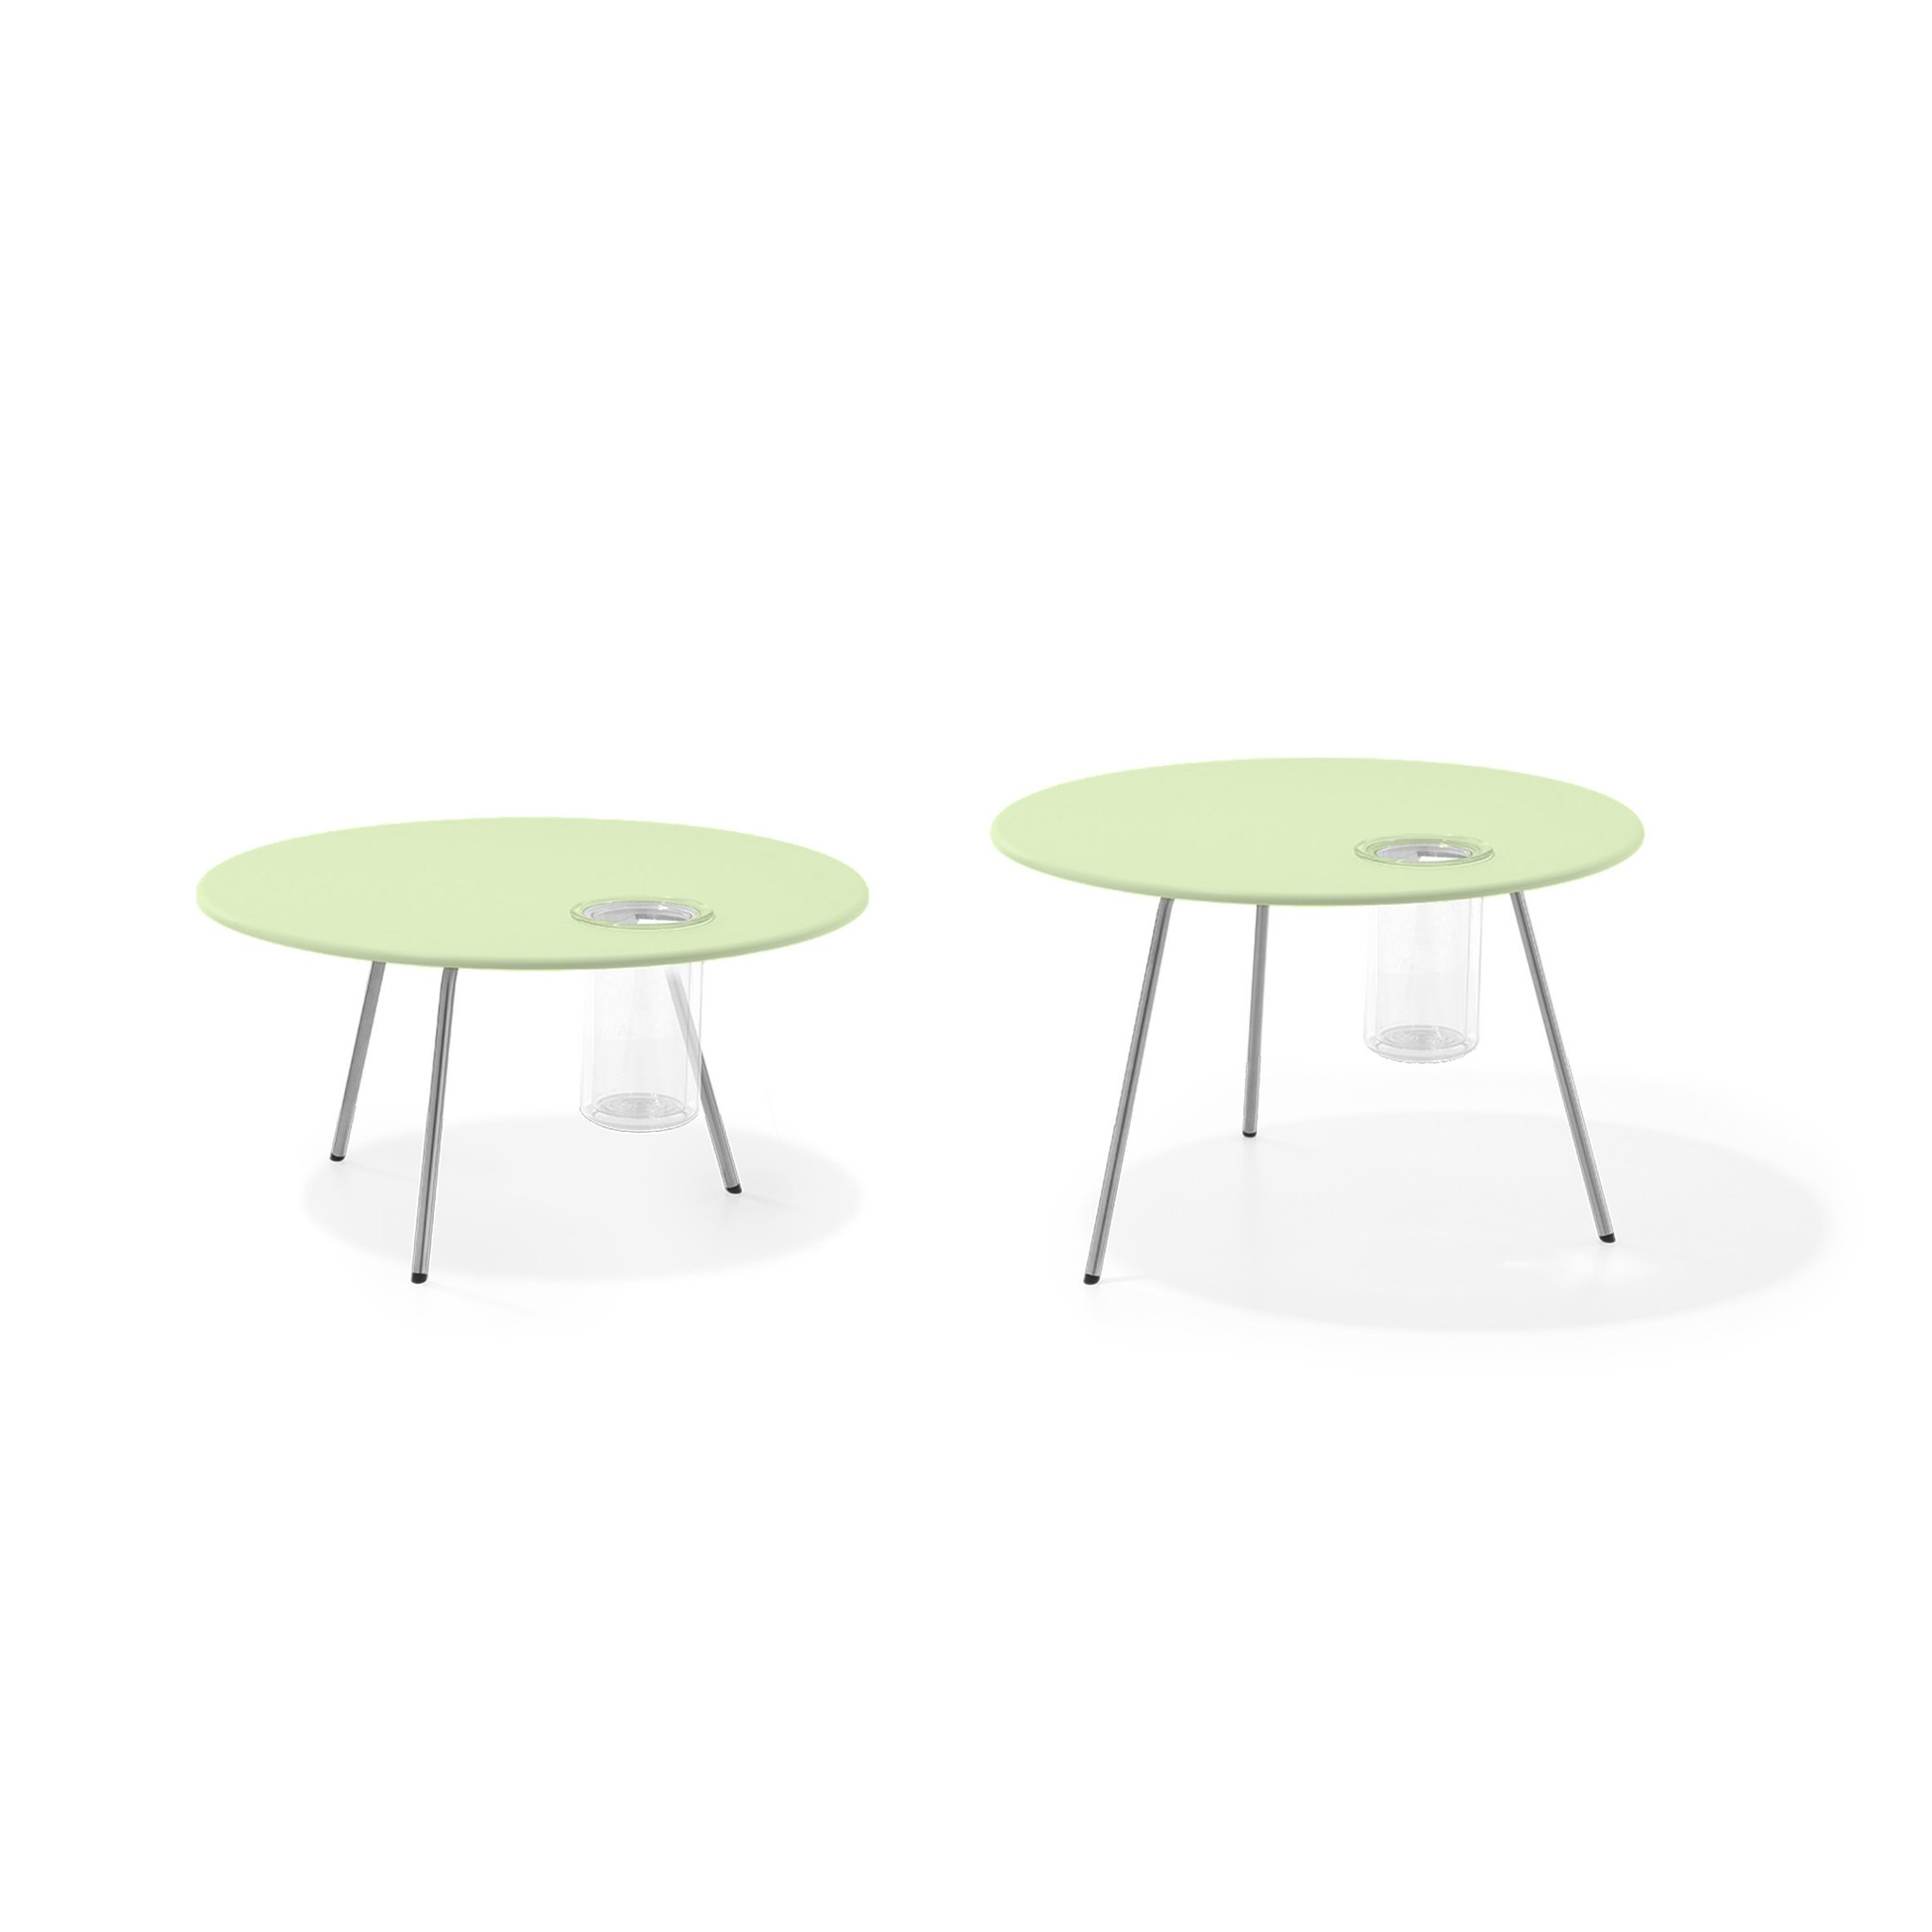 viteo air side table round with wine cooler stillfried wien green outdoor save piece nesting set oval brass and glass coffee accent bourse kids reading nook hall console mirrored